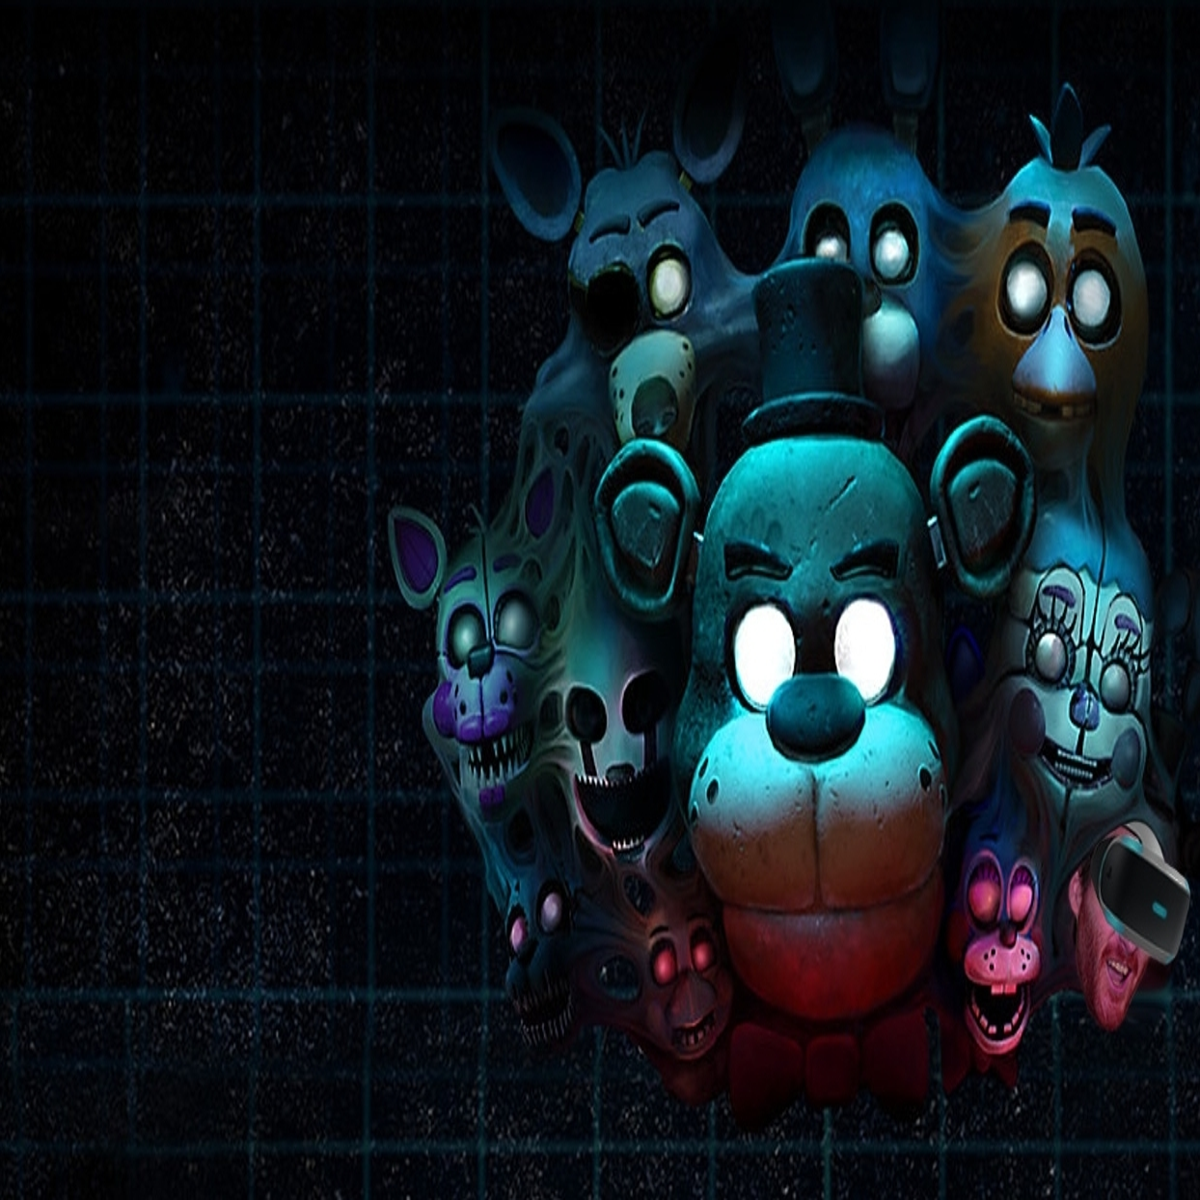 Designer of Five Nights at Freddy's Pivoted From Religious Games - The New  York Times